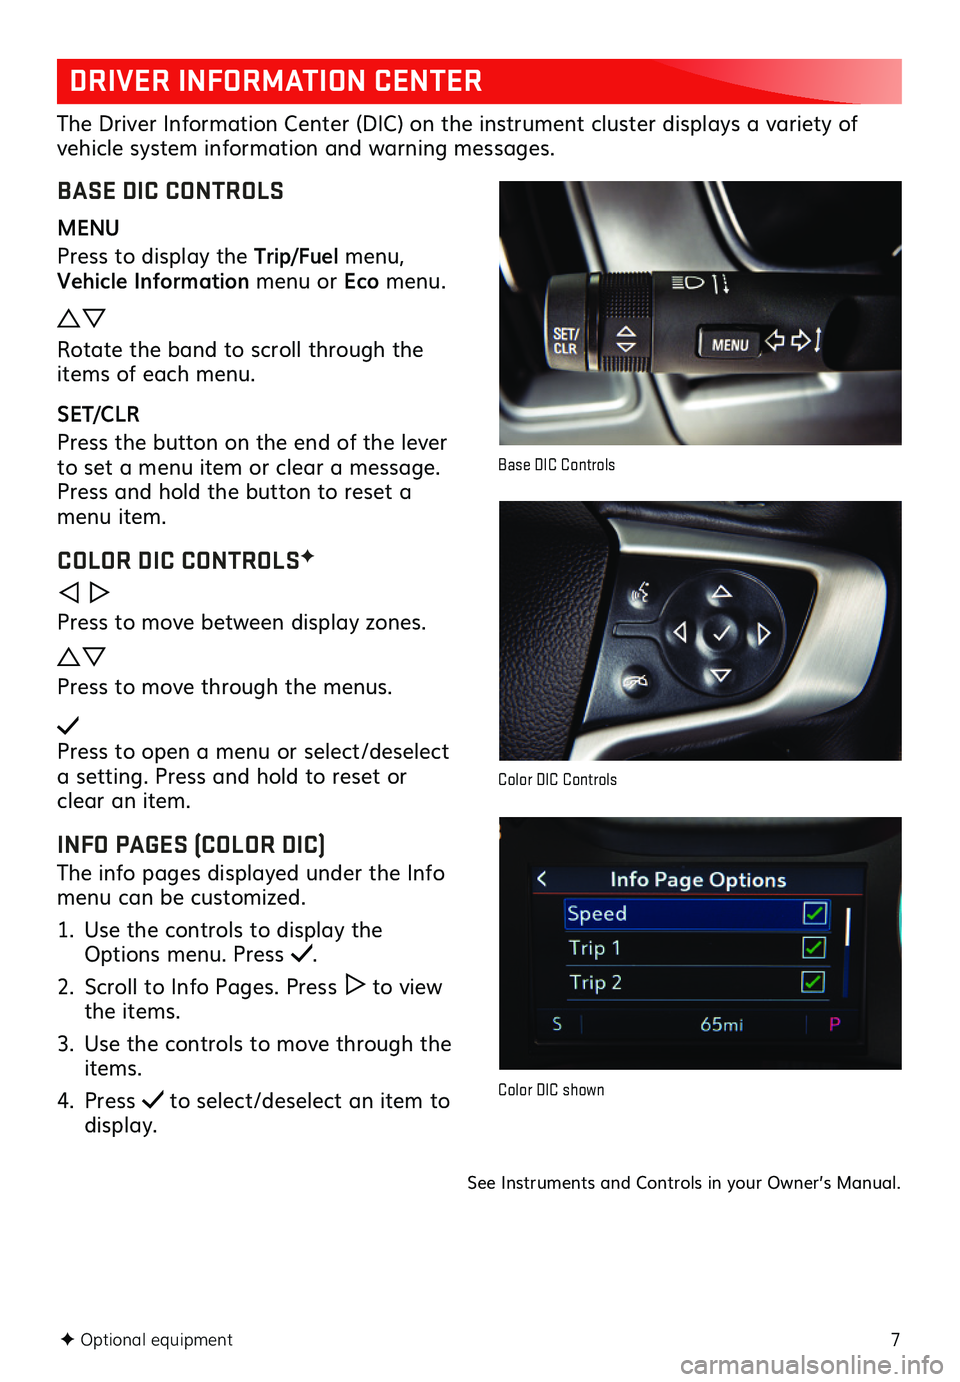 GMC CANYON 2020  Get To Know Guide 7
DRIVER INFORMATION CENTER
The Driver Information Center (DIC) on the instrument cluster displays a variety of vehicle system information and warning messages. 
BASE DIC CONTROLS
MENU
Press to displa